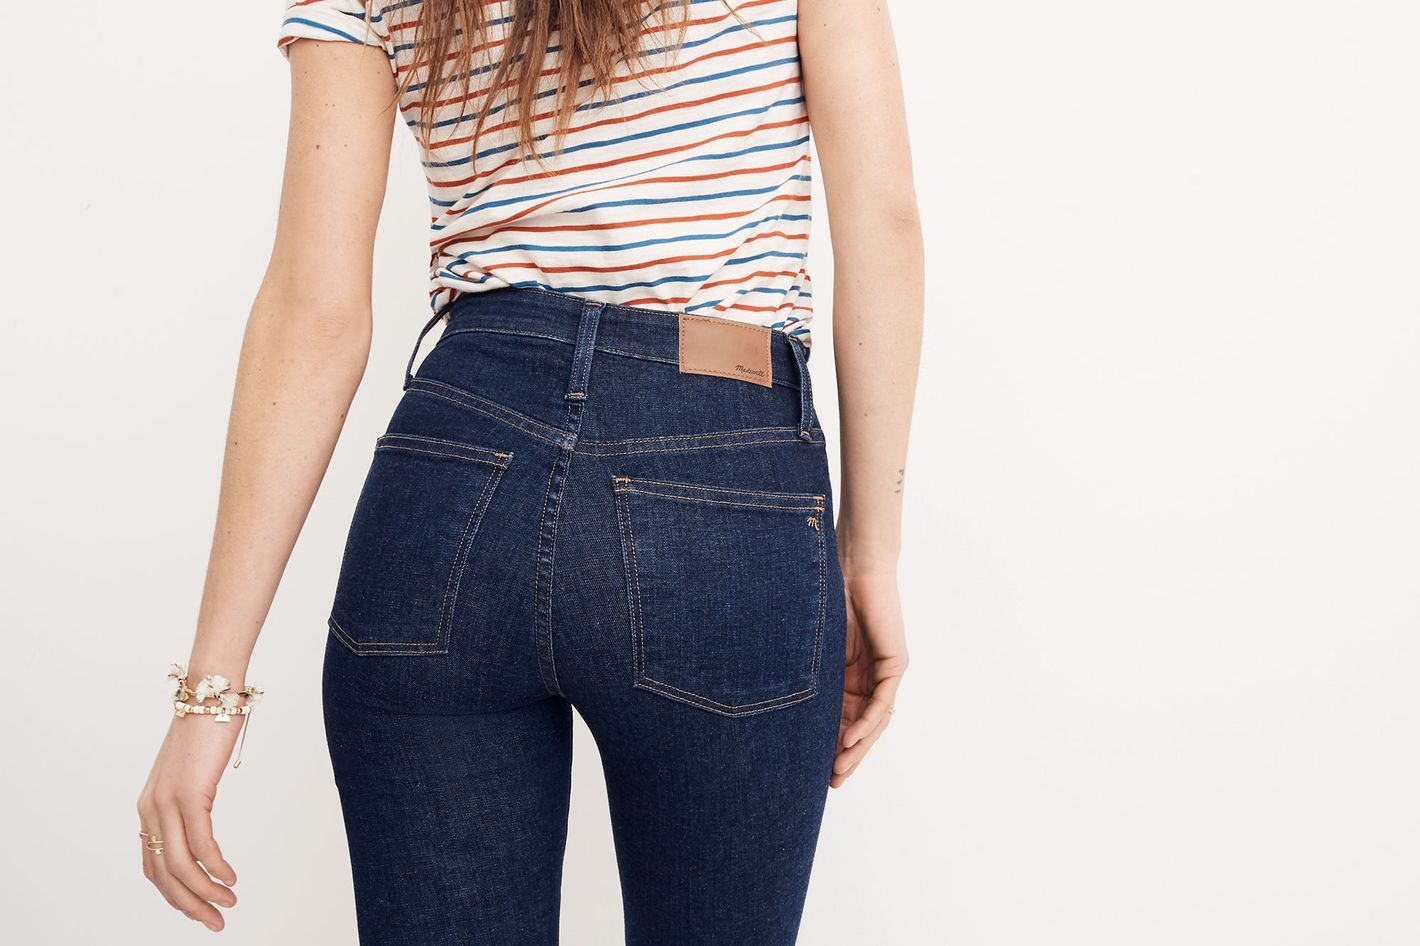 Madewell Size Chart Jeans